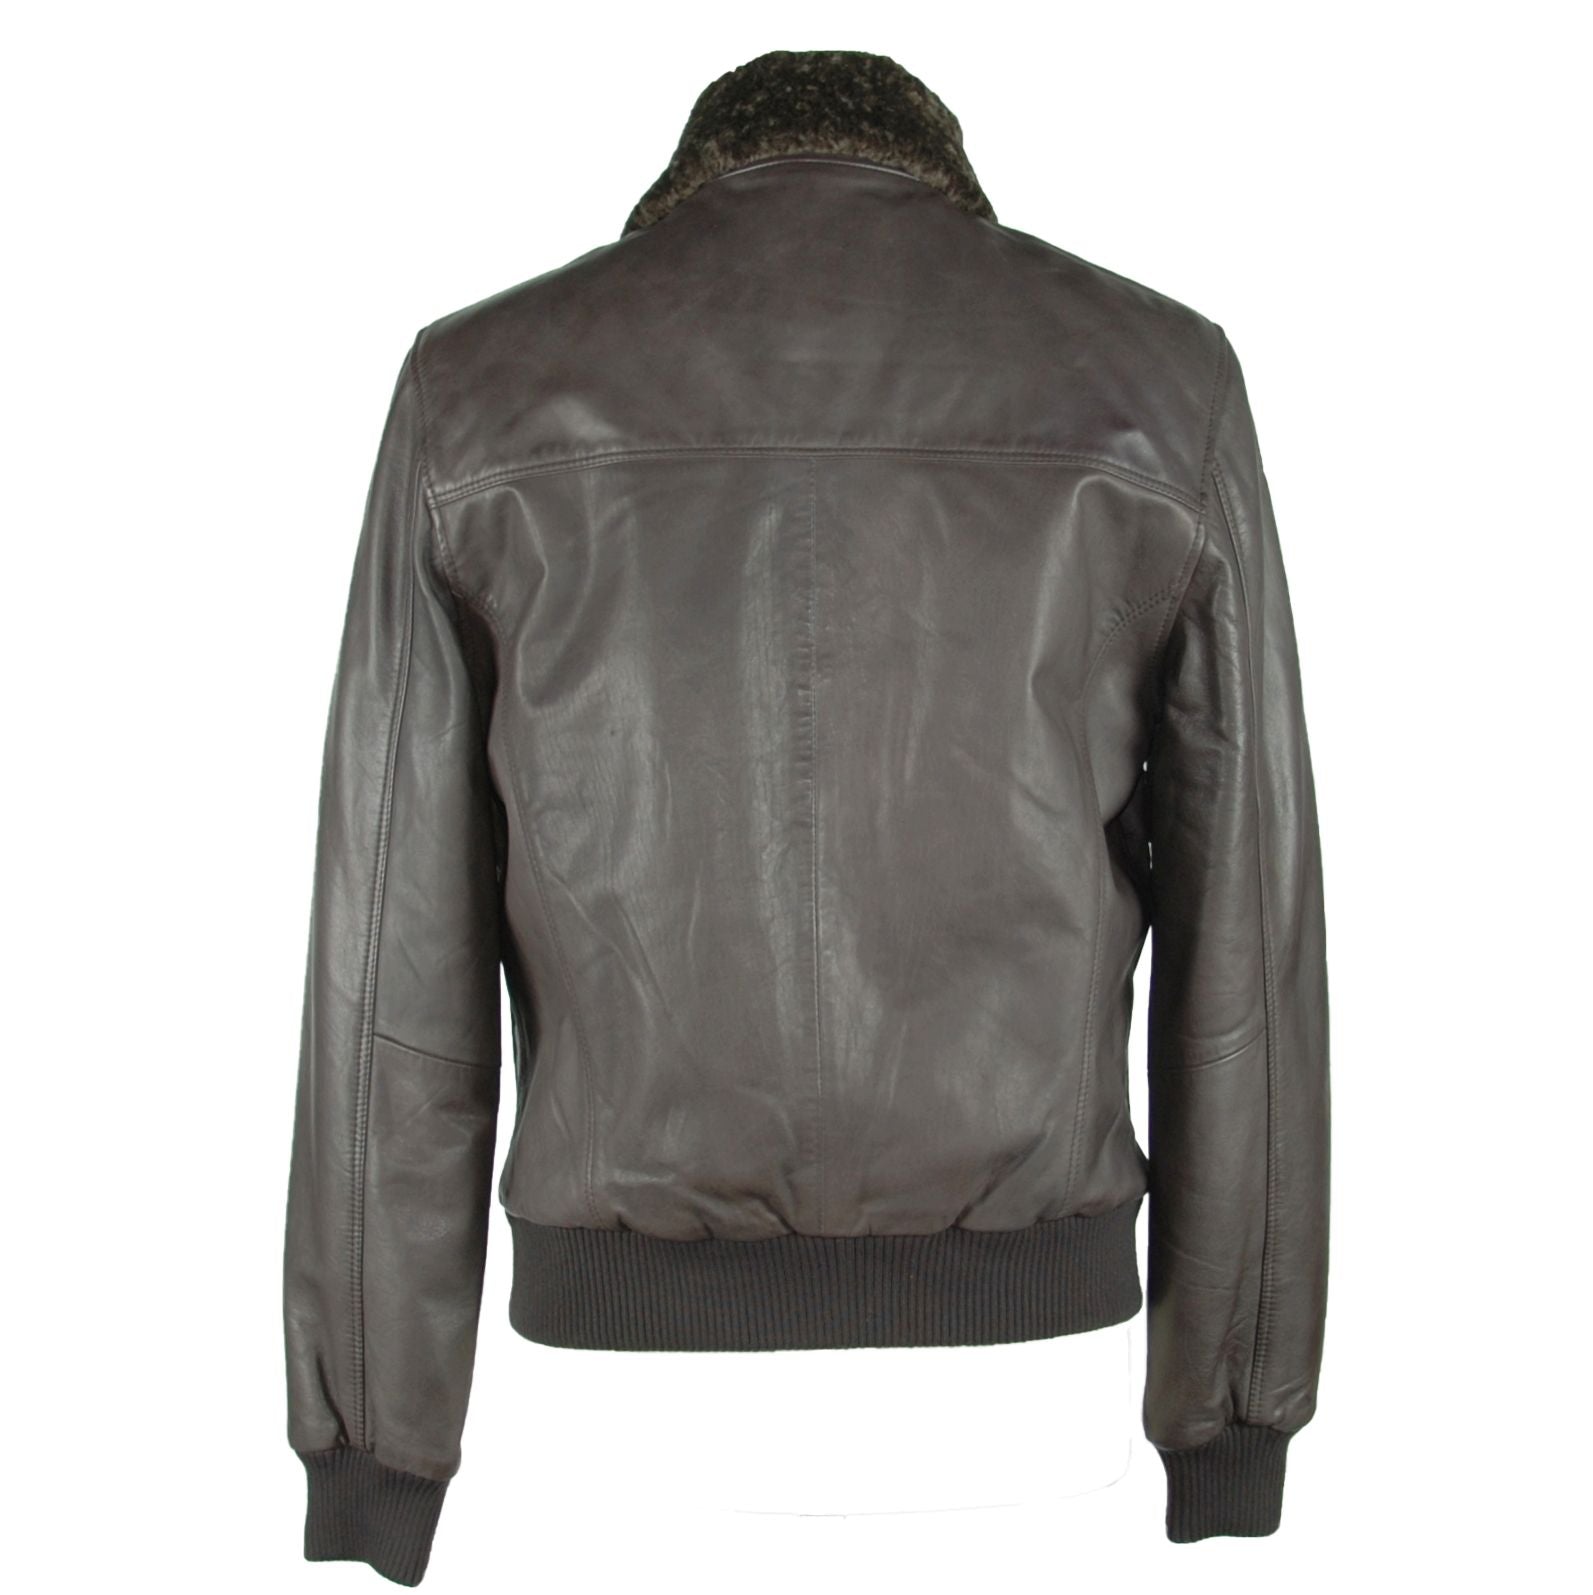 Exquisite Brown Leather Jacket